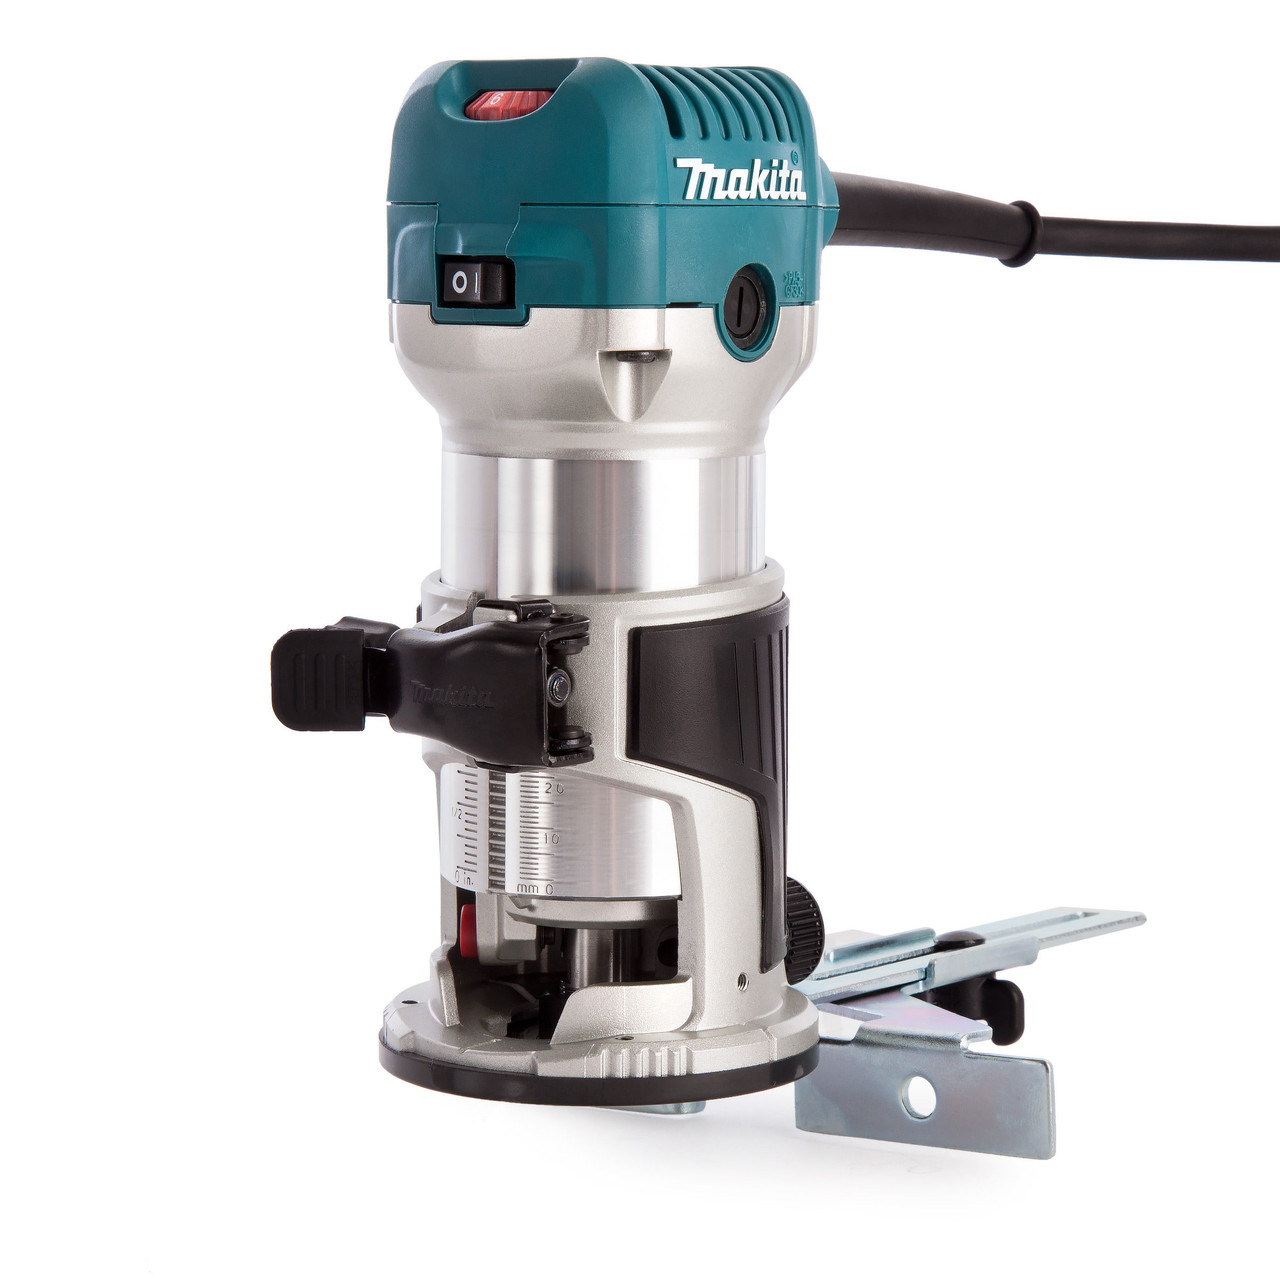 Makita RT0700CX4 Router Laminate Trimmer 110V | Toolstop